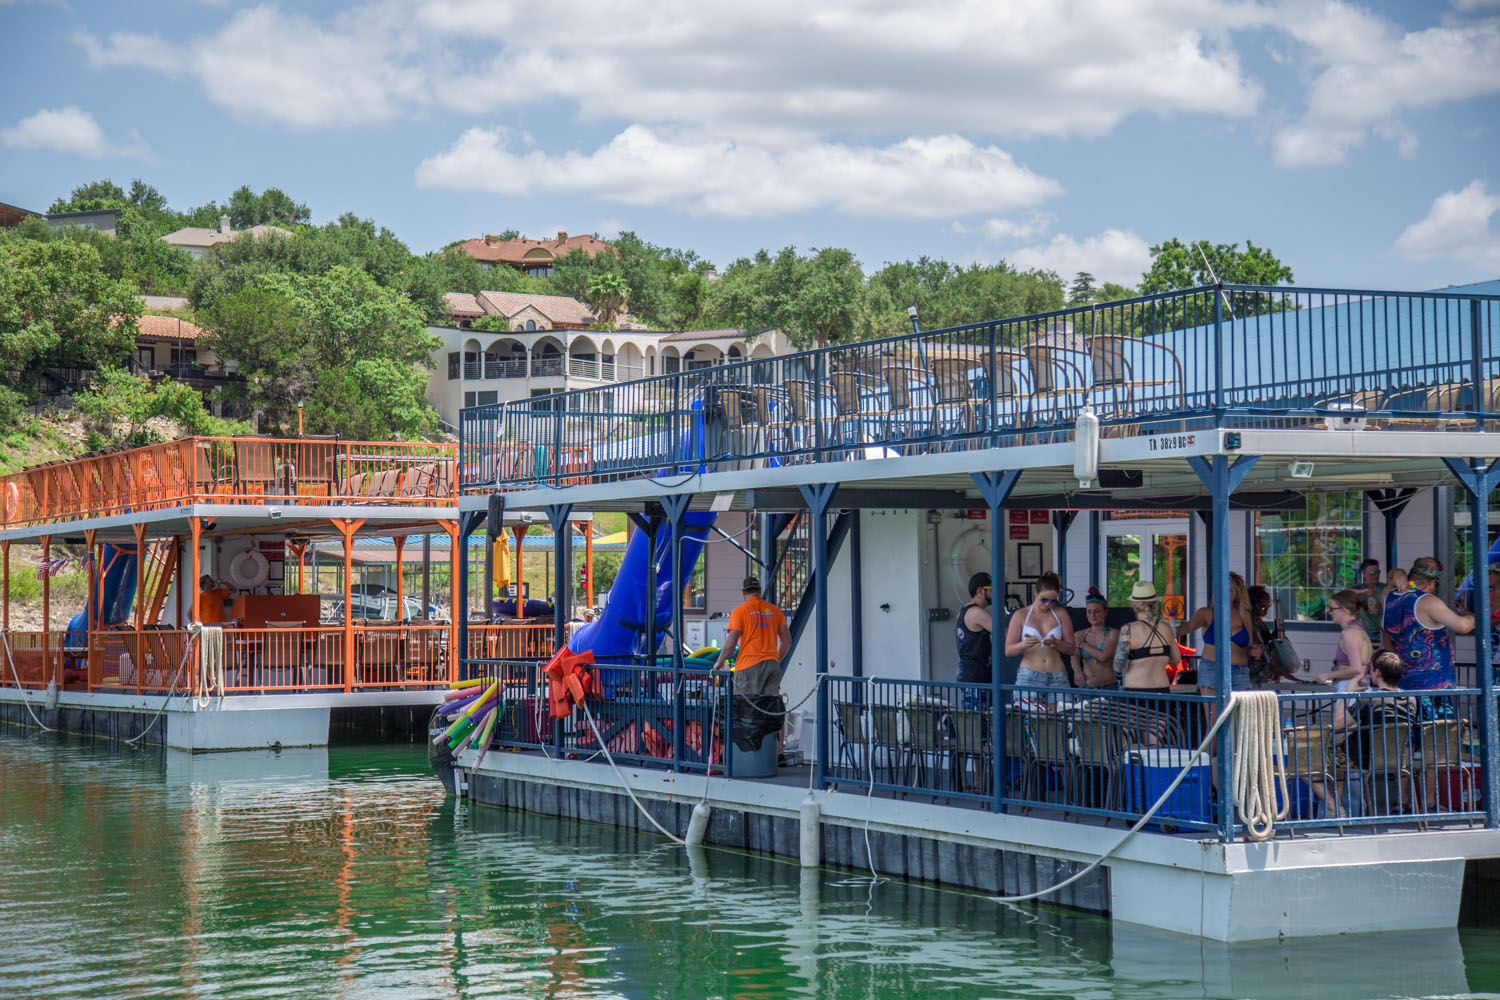 Double Decker Party Boats with slides at Lakeway Marina on Lake Travis.